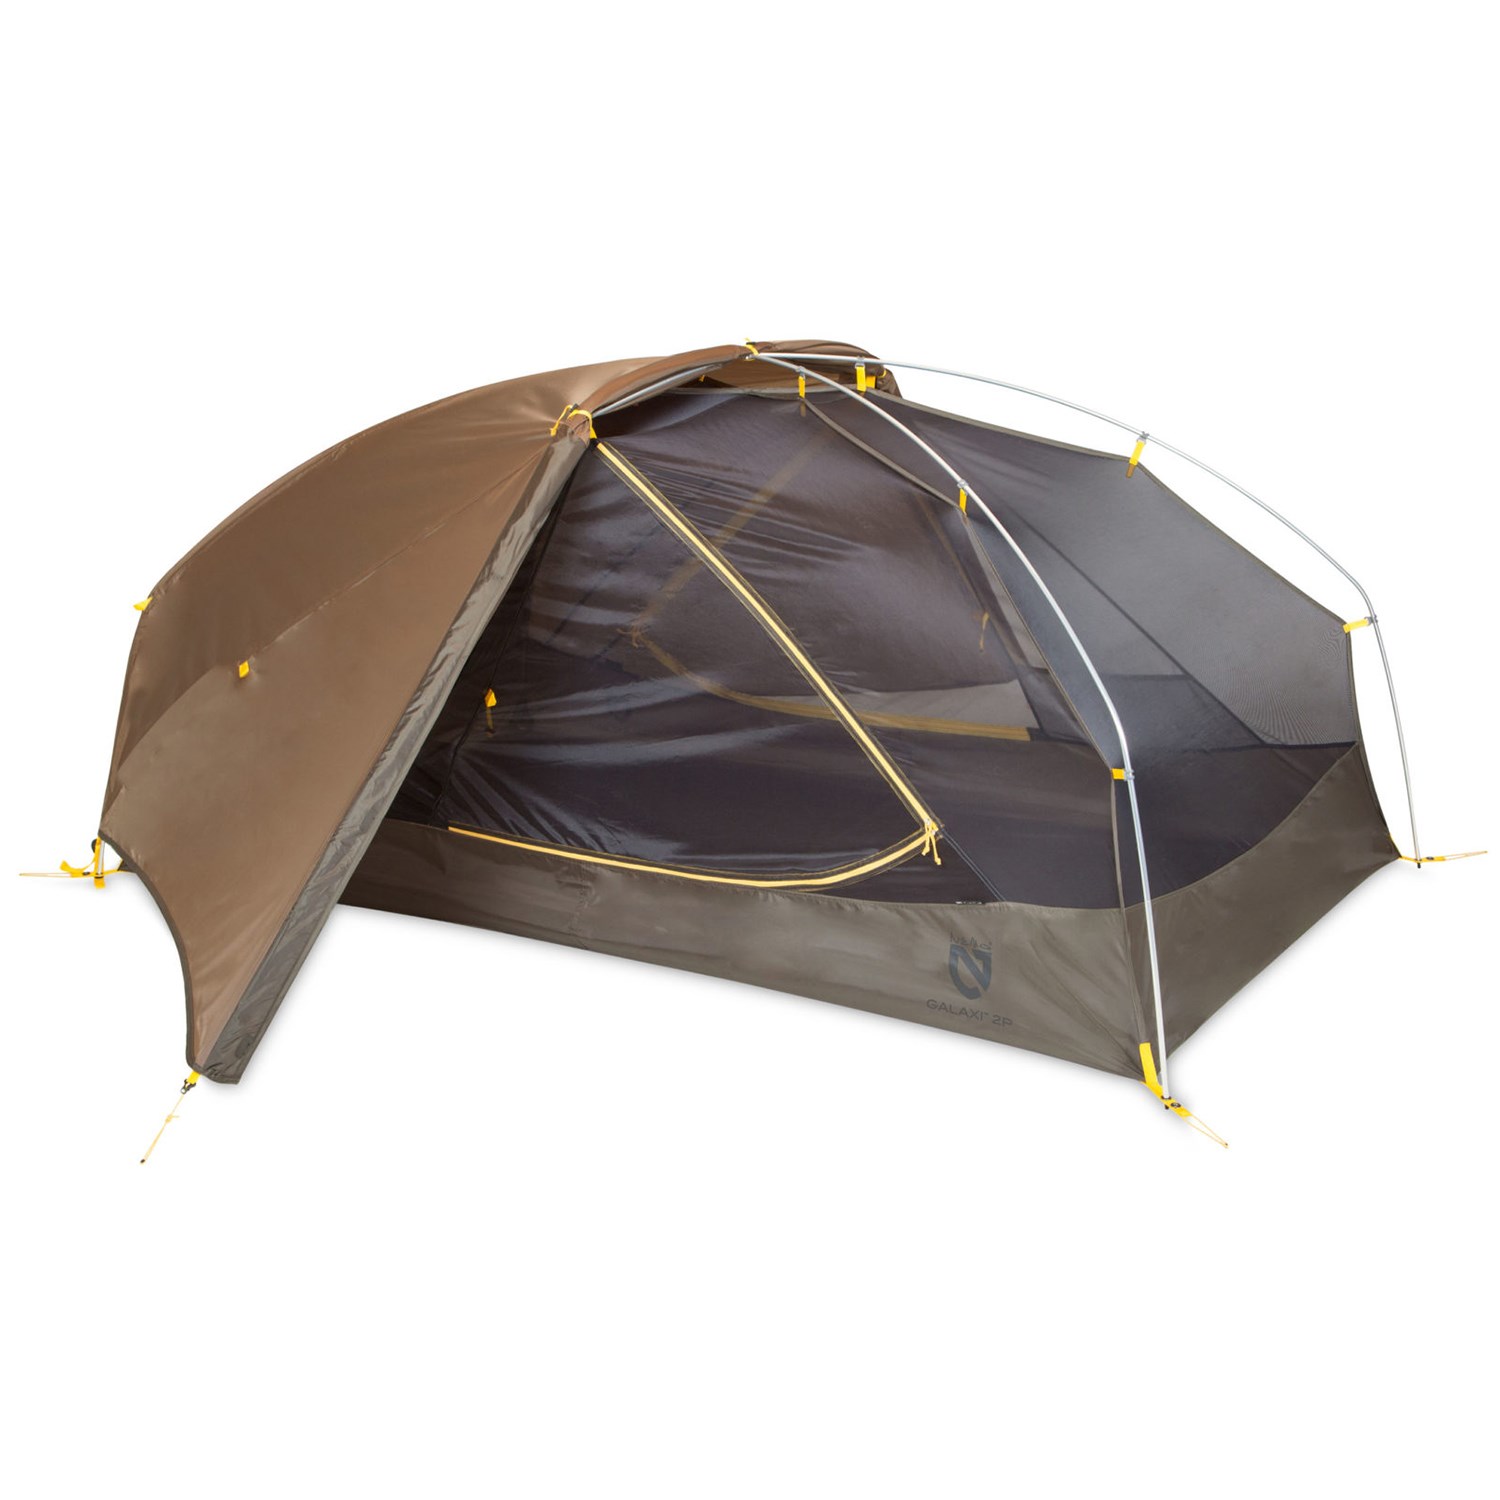 NEMO Galaxi 2 Person Backpacking Tent with Footprint